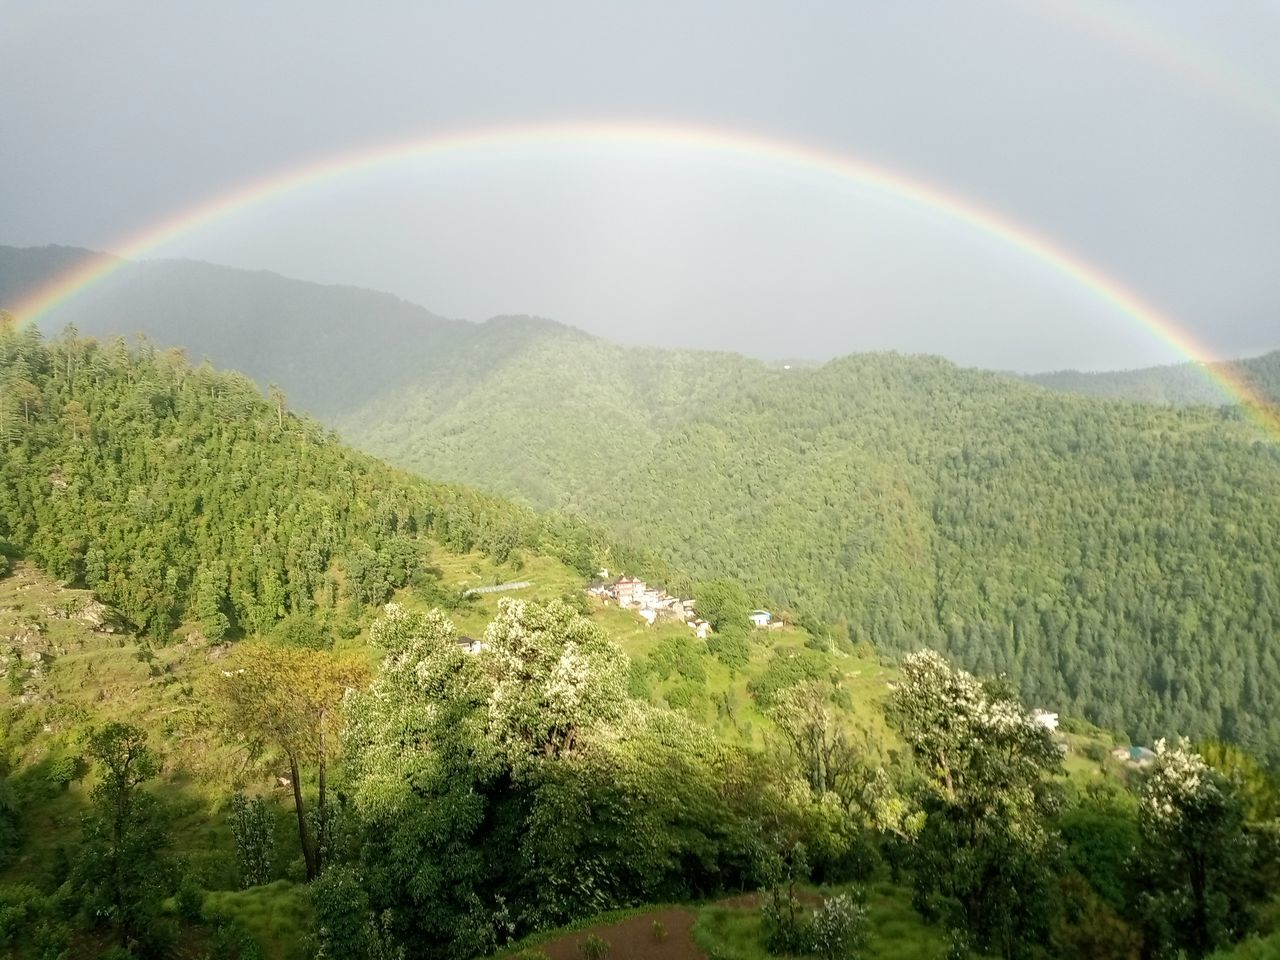 rainbow, beauty in nature, scenics - nature, plant, double rainbow, tree, environment, nature, tranquility, landscape, sky, multi colored, land, tranquil scene, idyllic, spectrum, green, mountain, hill station, no people, cloud, non-urban scene, natural phenomenon, field, forest, day, outdoors, growth, sunlight, rural scene, wet, refraction, rain, vegetation, curve, grass, remote, water